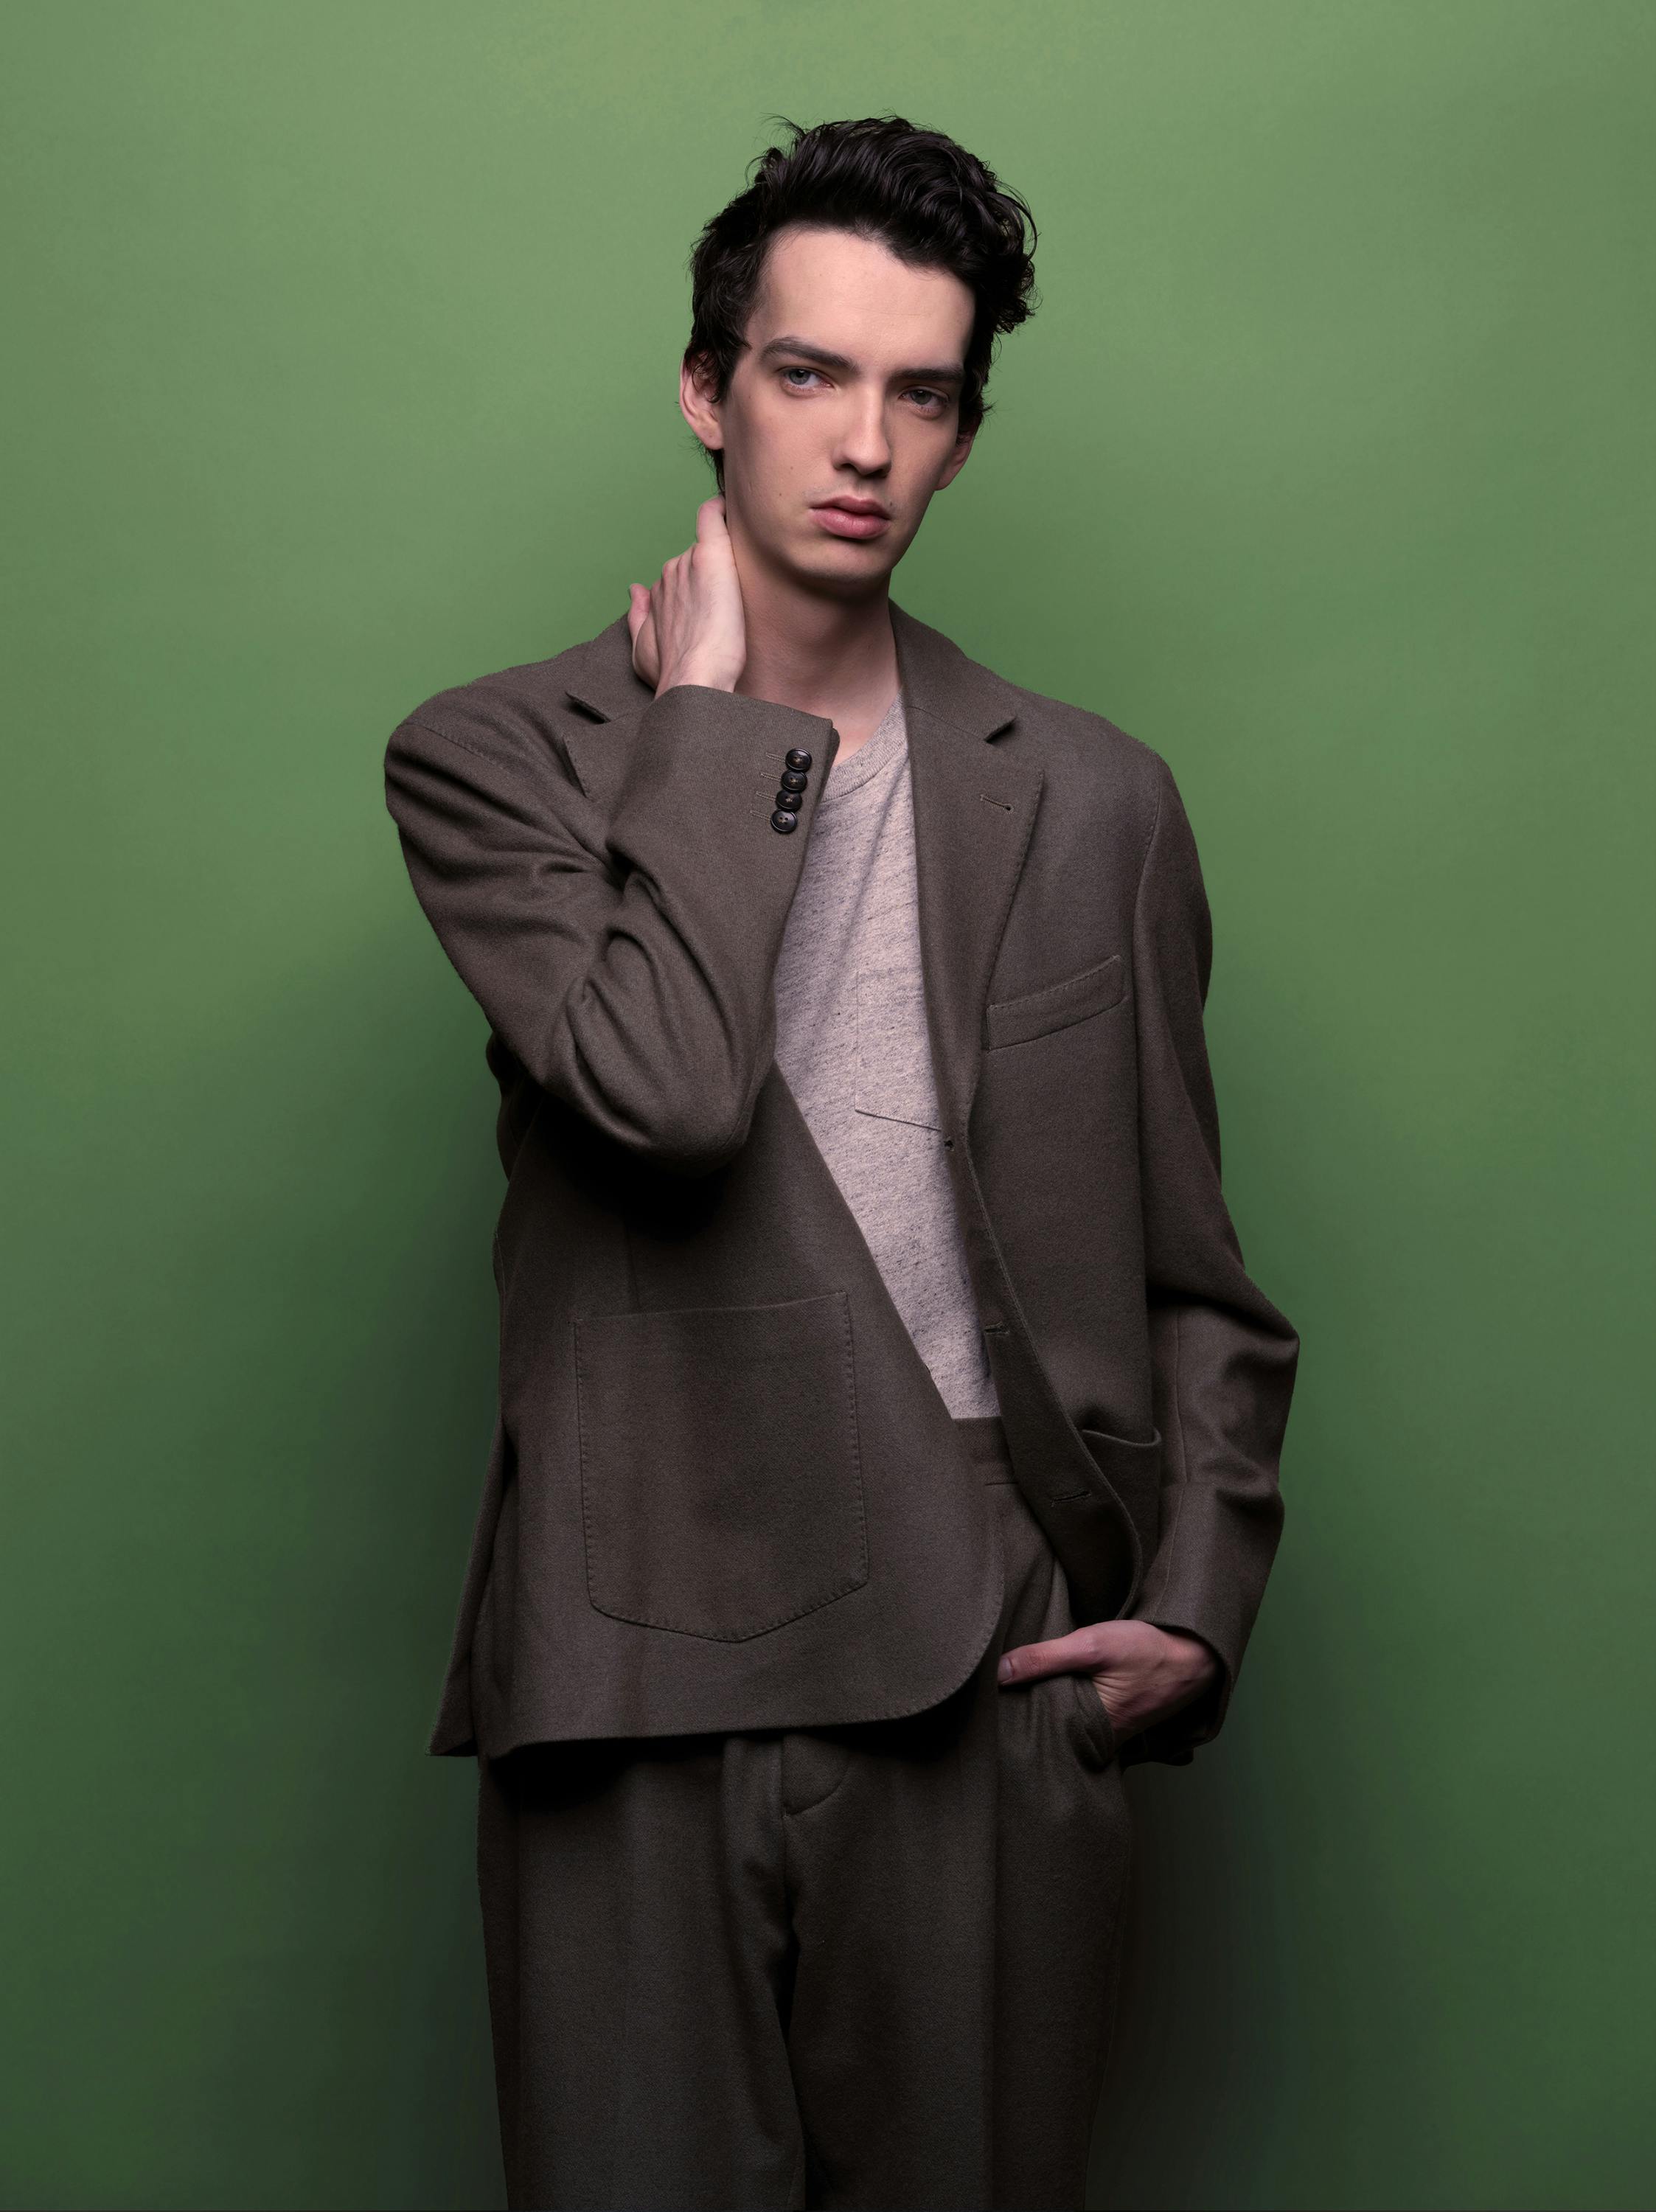 Kodi Smit-McPhee wears a grey brown suit and stands against an olive green wall. He holds one hand on his neck and looks at something off screen.